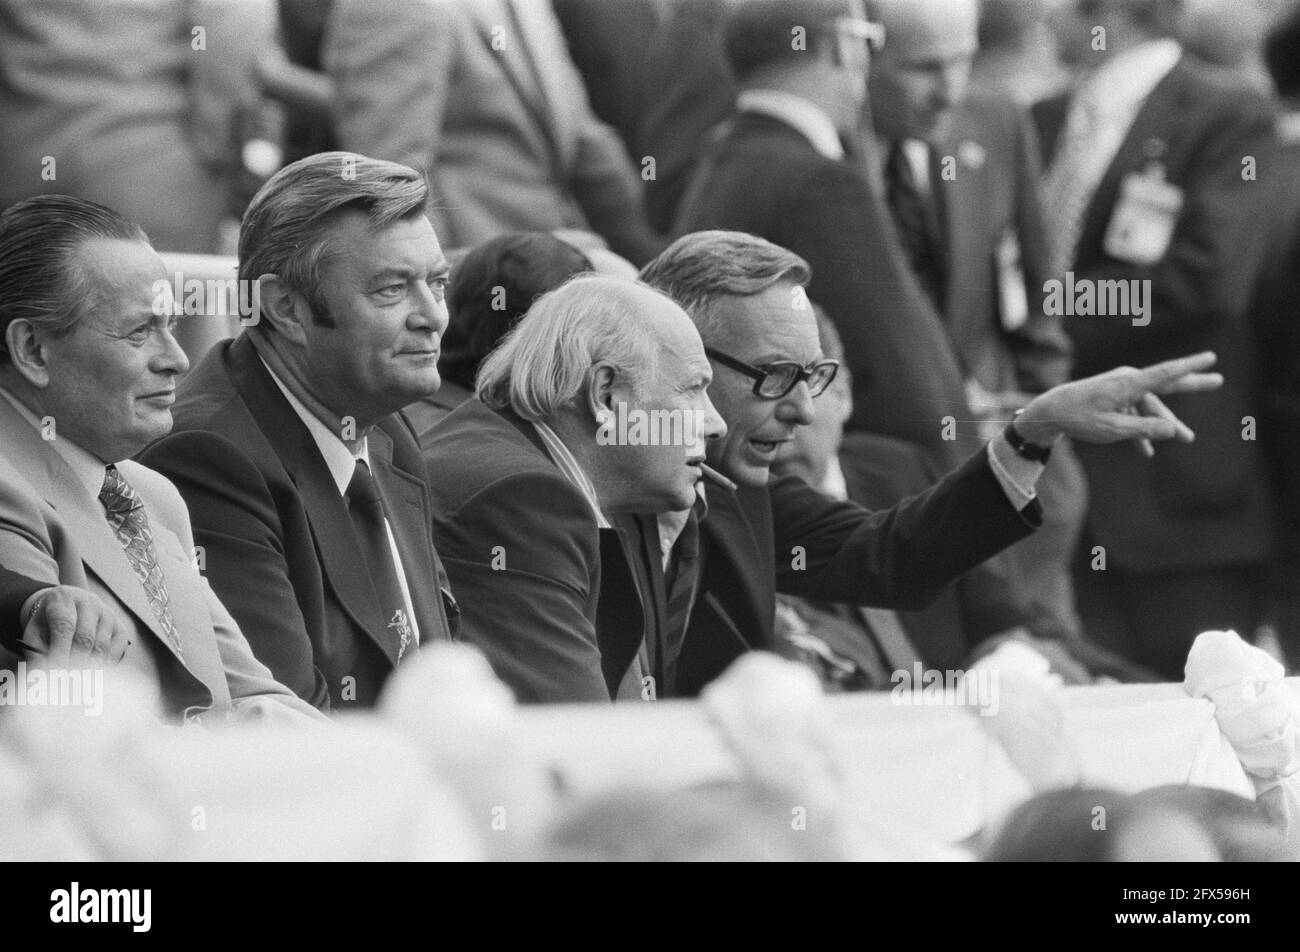 Final World Cup 1974 in Munich, West Germany v. Netherlands 2-1; Den Uyl (center) on grandstand, July 7, 1974, finals, sports, grandstands, soccer, world championships, The Netherlands, 20th century press agency photo, news to remember, documentary, historic photography 1945-1990, visual stories, human history of the Twentieth Century, capturing moments in time Stock Photo